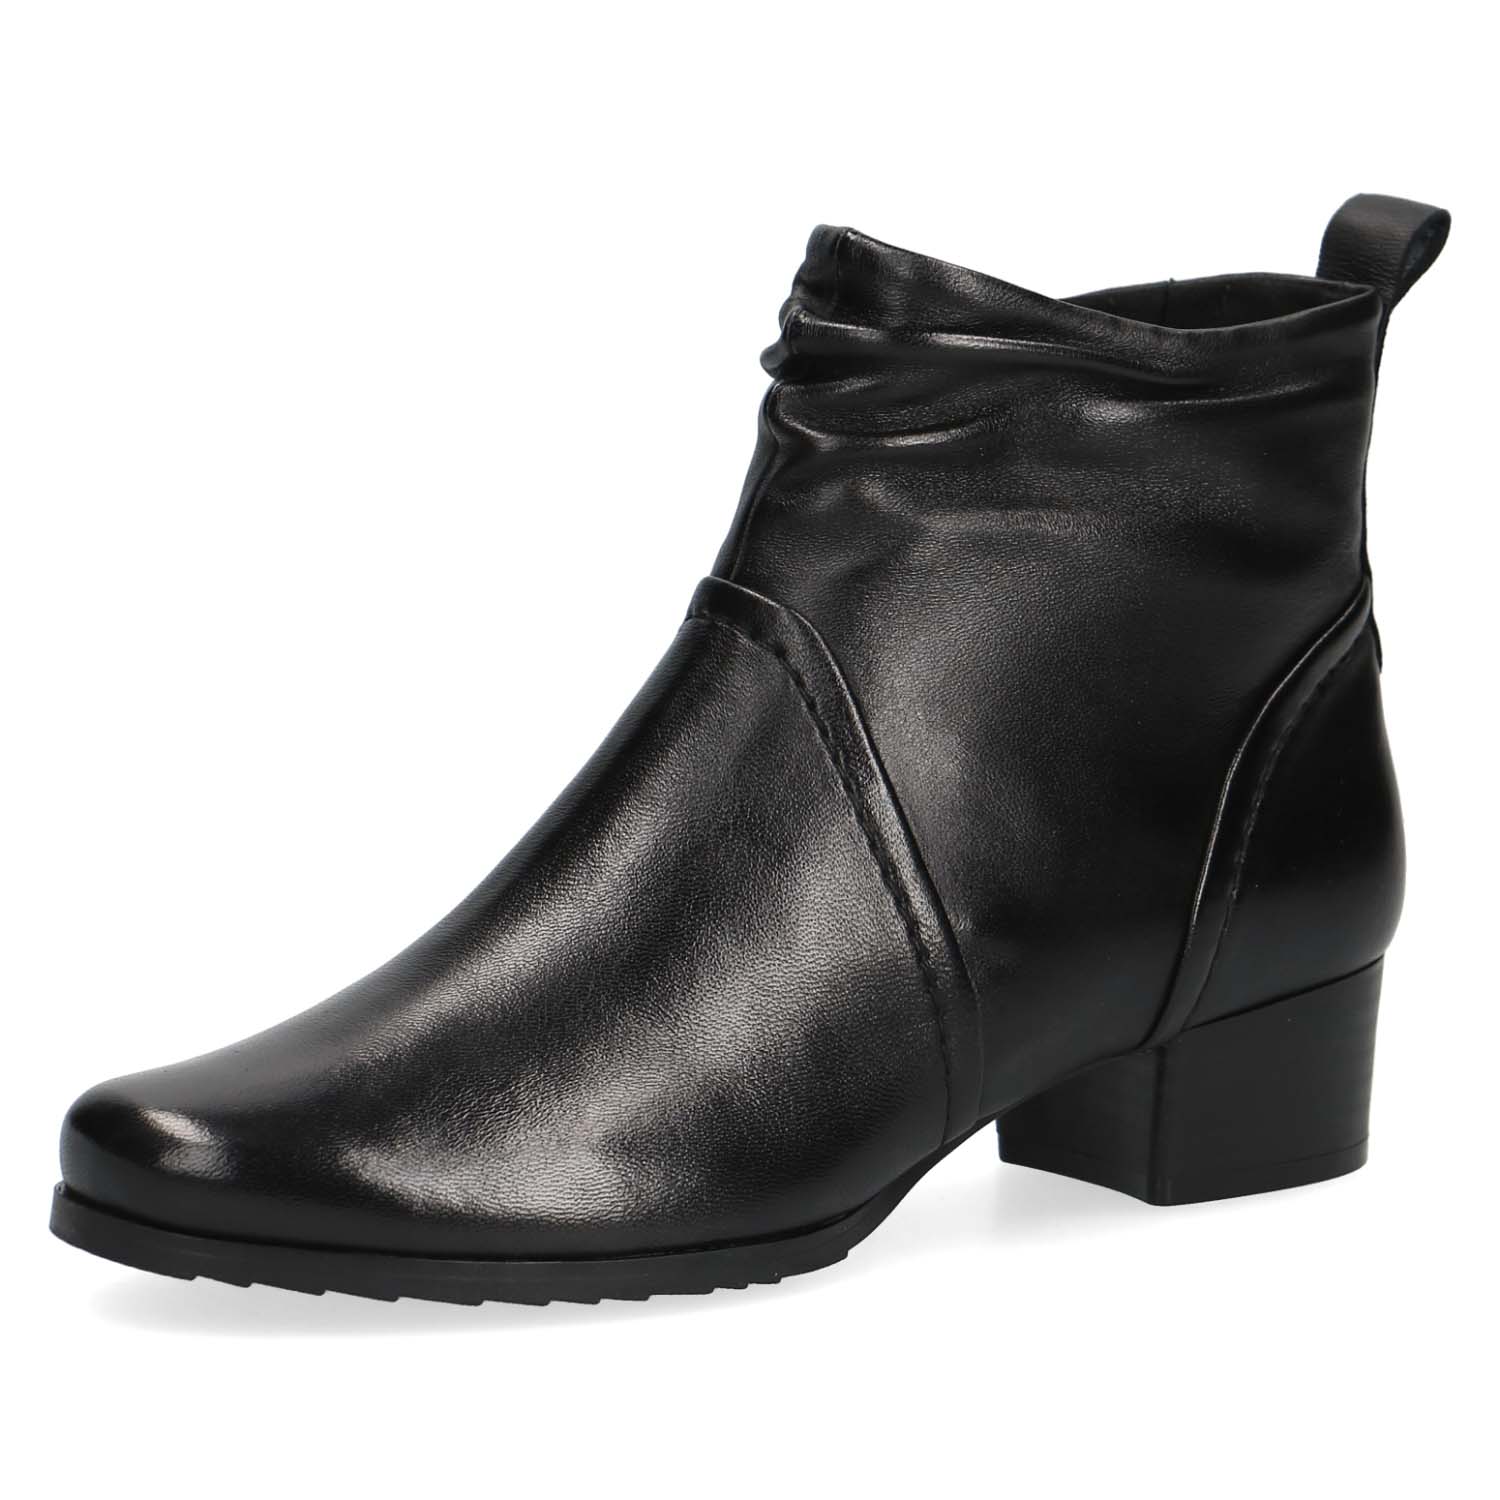 Angled view of the Caprice Dressy Ankle Boot highlighting its block heel design.